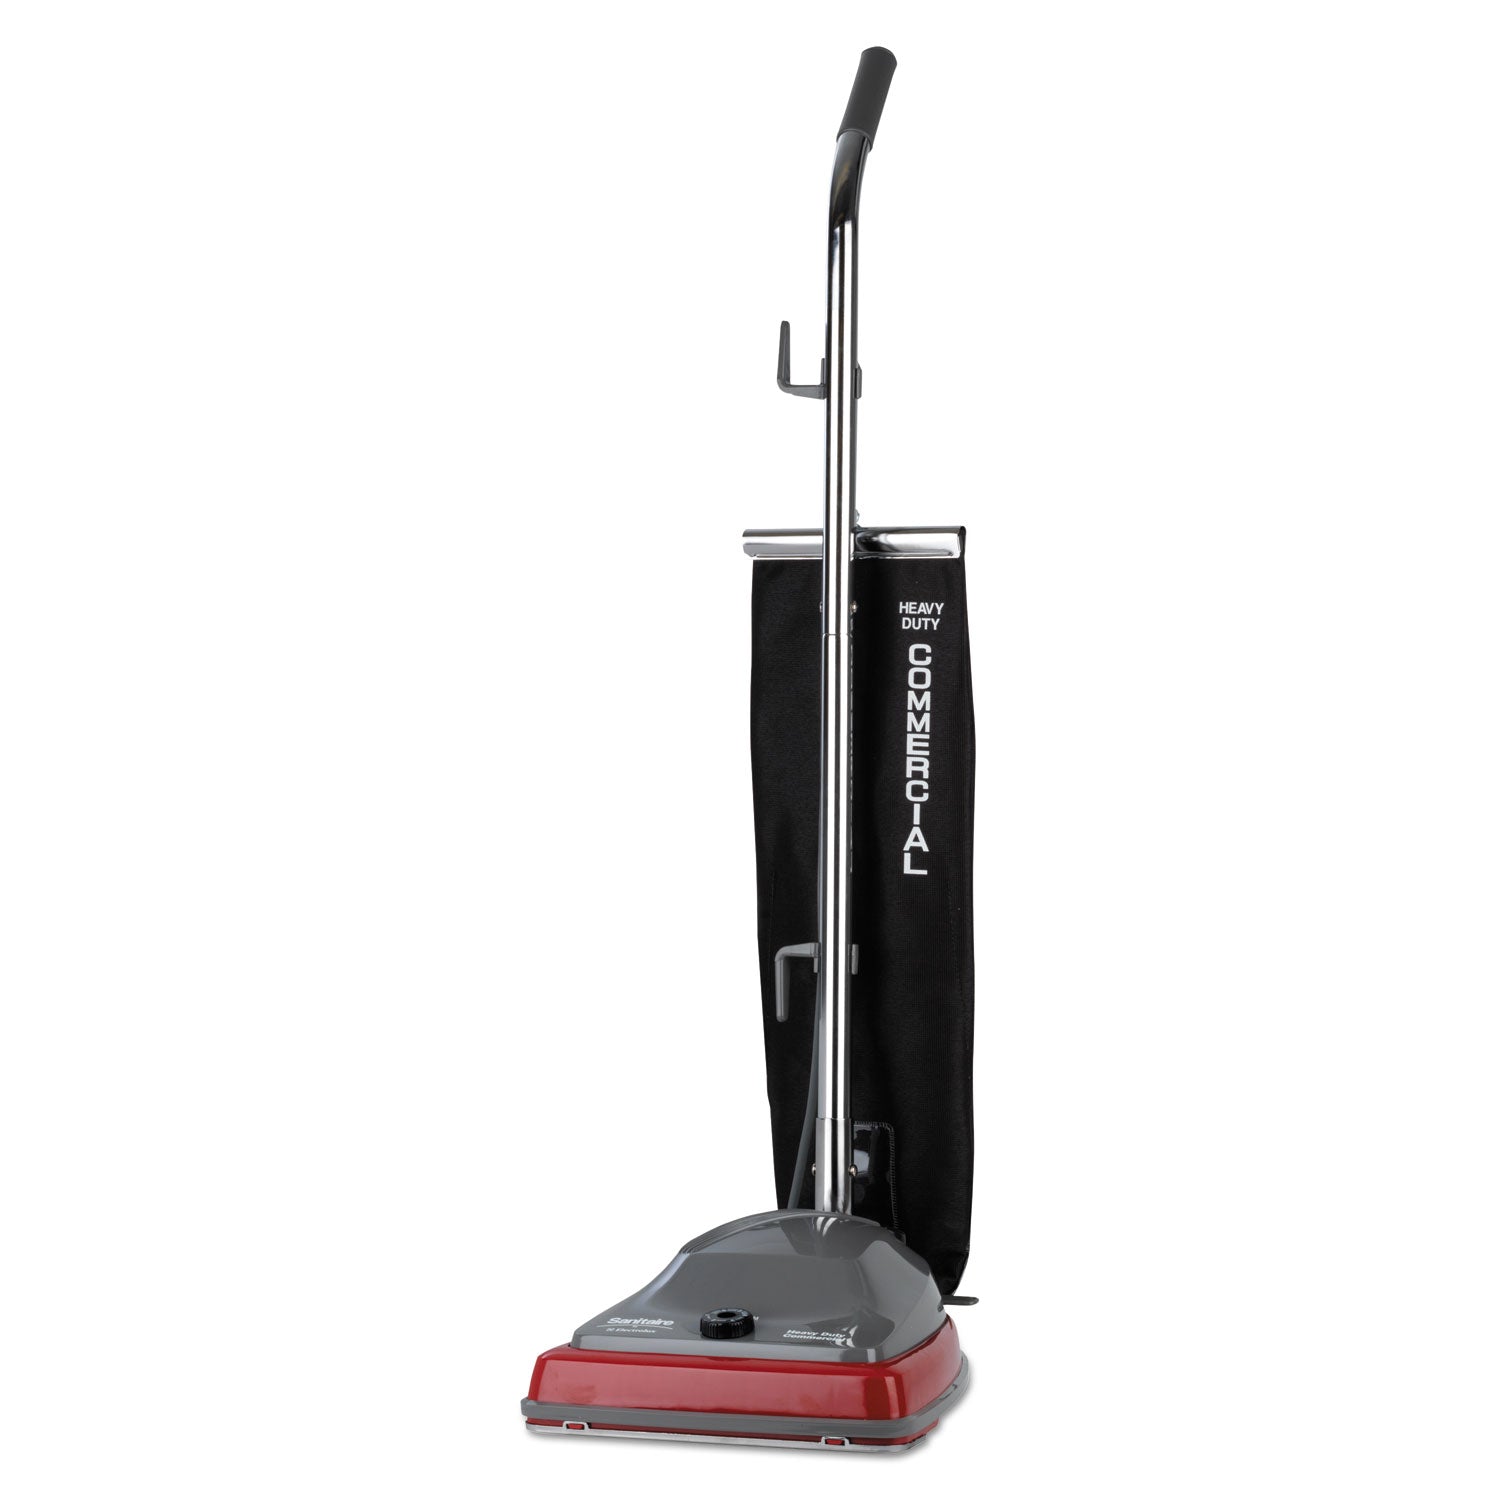 tradition-upright-vacuum-sc679j-12-cleaning-path-gray-red-black_eursc679k - 2